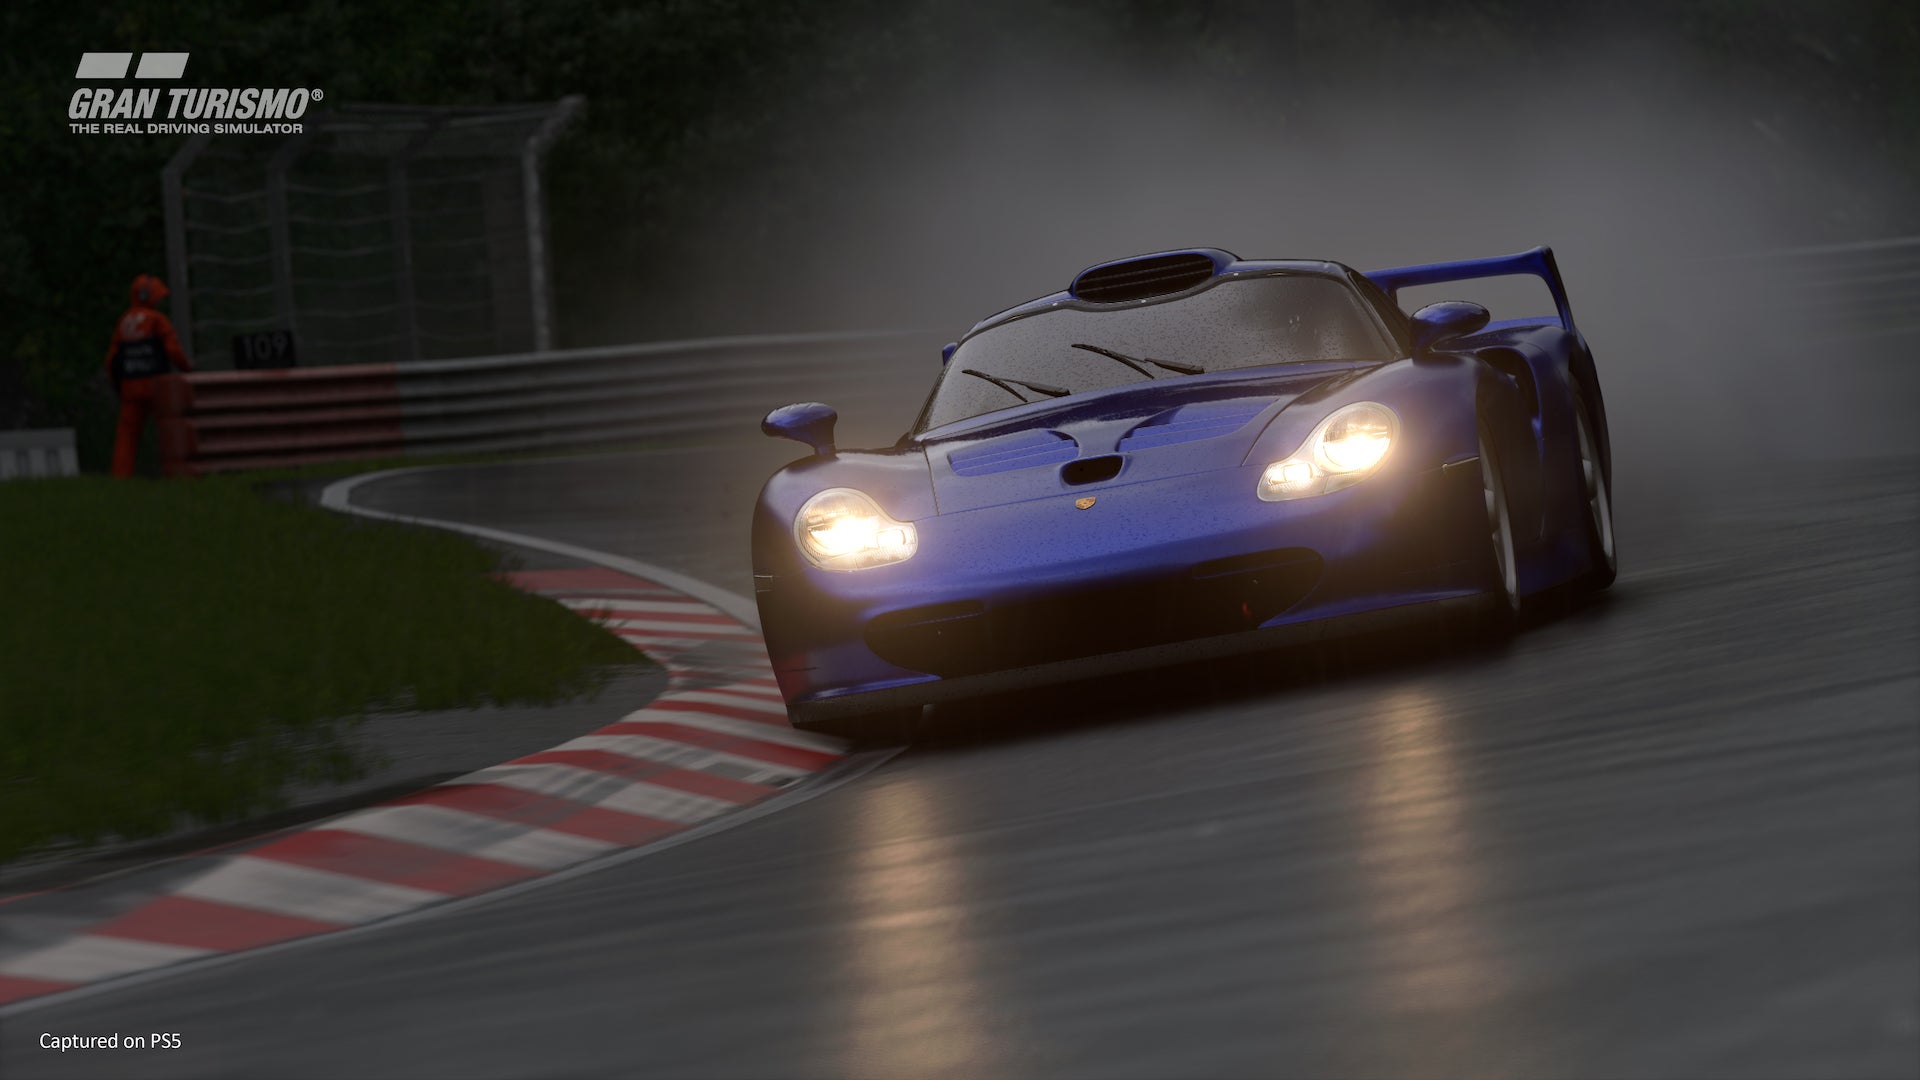 Gran Turismo 7 Review: 4K Graphics, Cars, Not Much Innovation